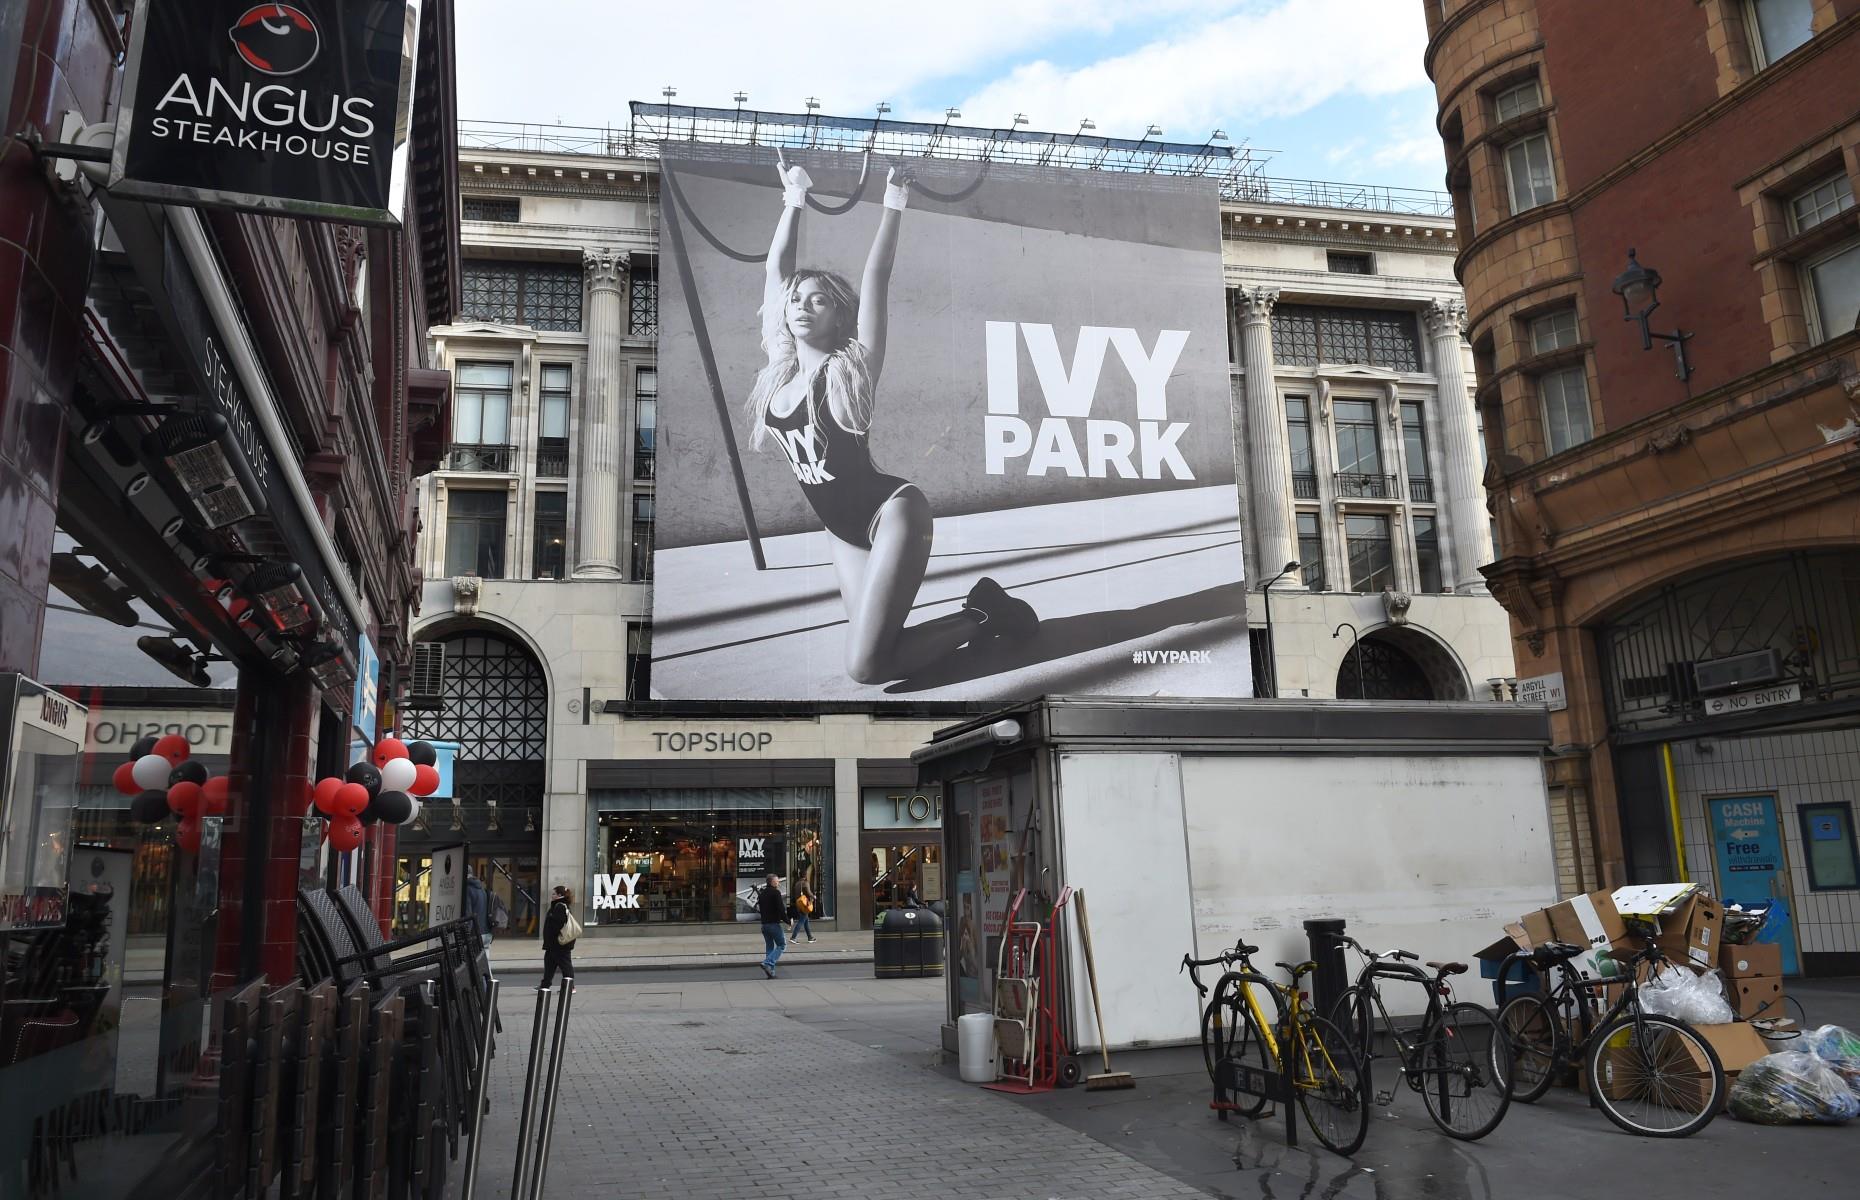 <p>Similar to her husband, Queen Bey also has her own activewear fashion line. Ivy Park, in partnership with Topshop, was launched in 2016. The brand was then relaunched with Adidas in 2019. Her Instagram post revealing the news got 3.6 million likes within hours of being posted, proving just how loyal her fans, known as the "beyhive", are. According to <em>Elle</em> magazine, Beyoncé is the first-ever African American woman to fully own her own sportswear brand. Her latest Ivy Park fashion drop, titled<em> Ivy Heart</em>, was released in February, and the Valentine's Day-themed collection had a $30 to $300 price range.</p>